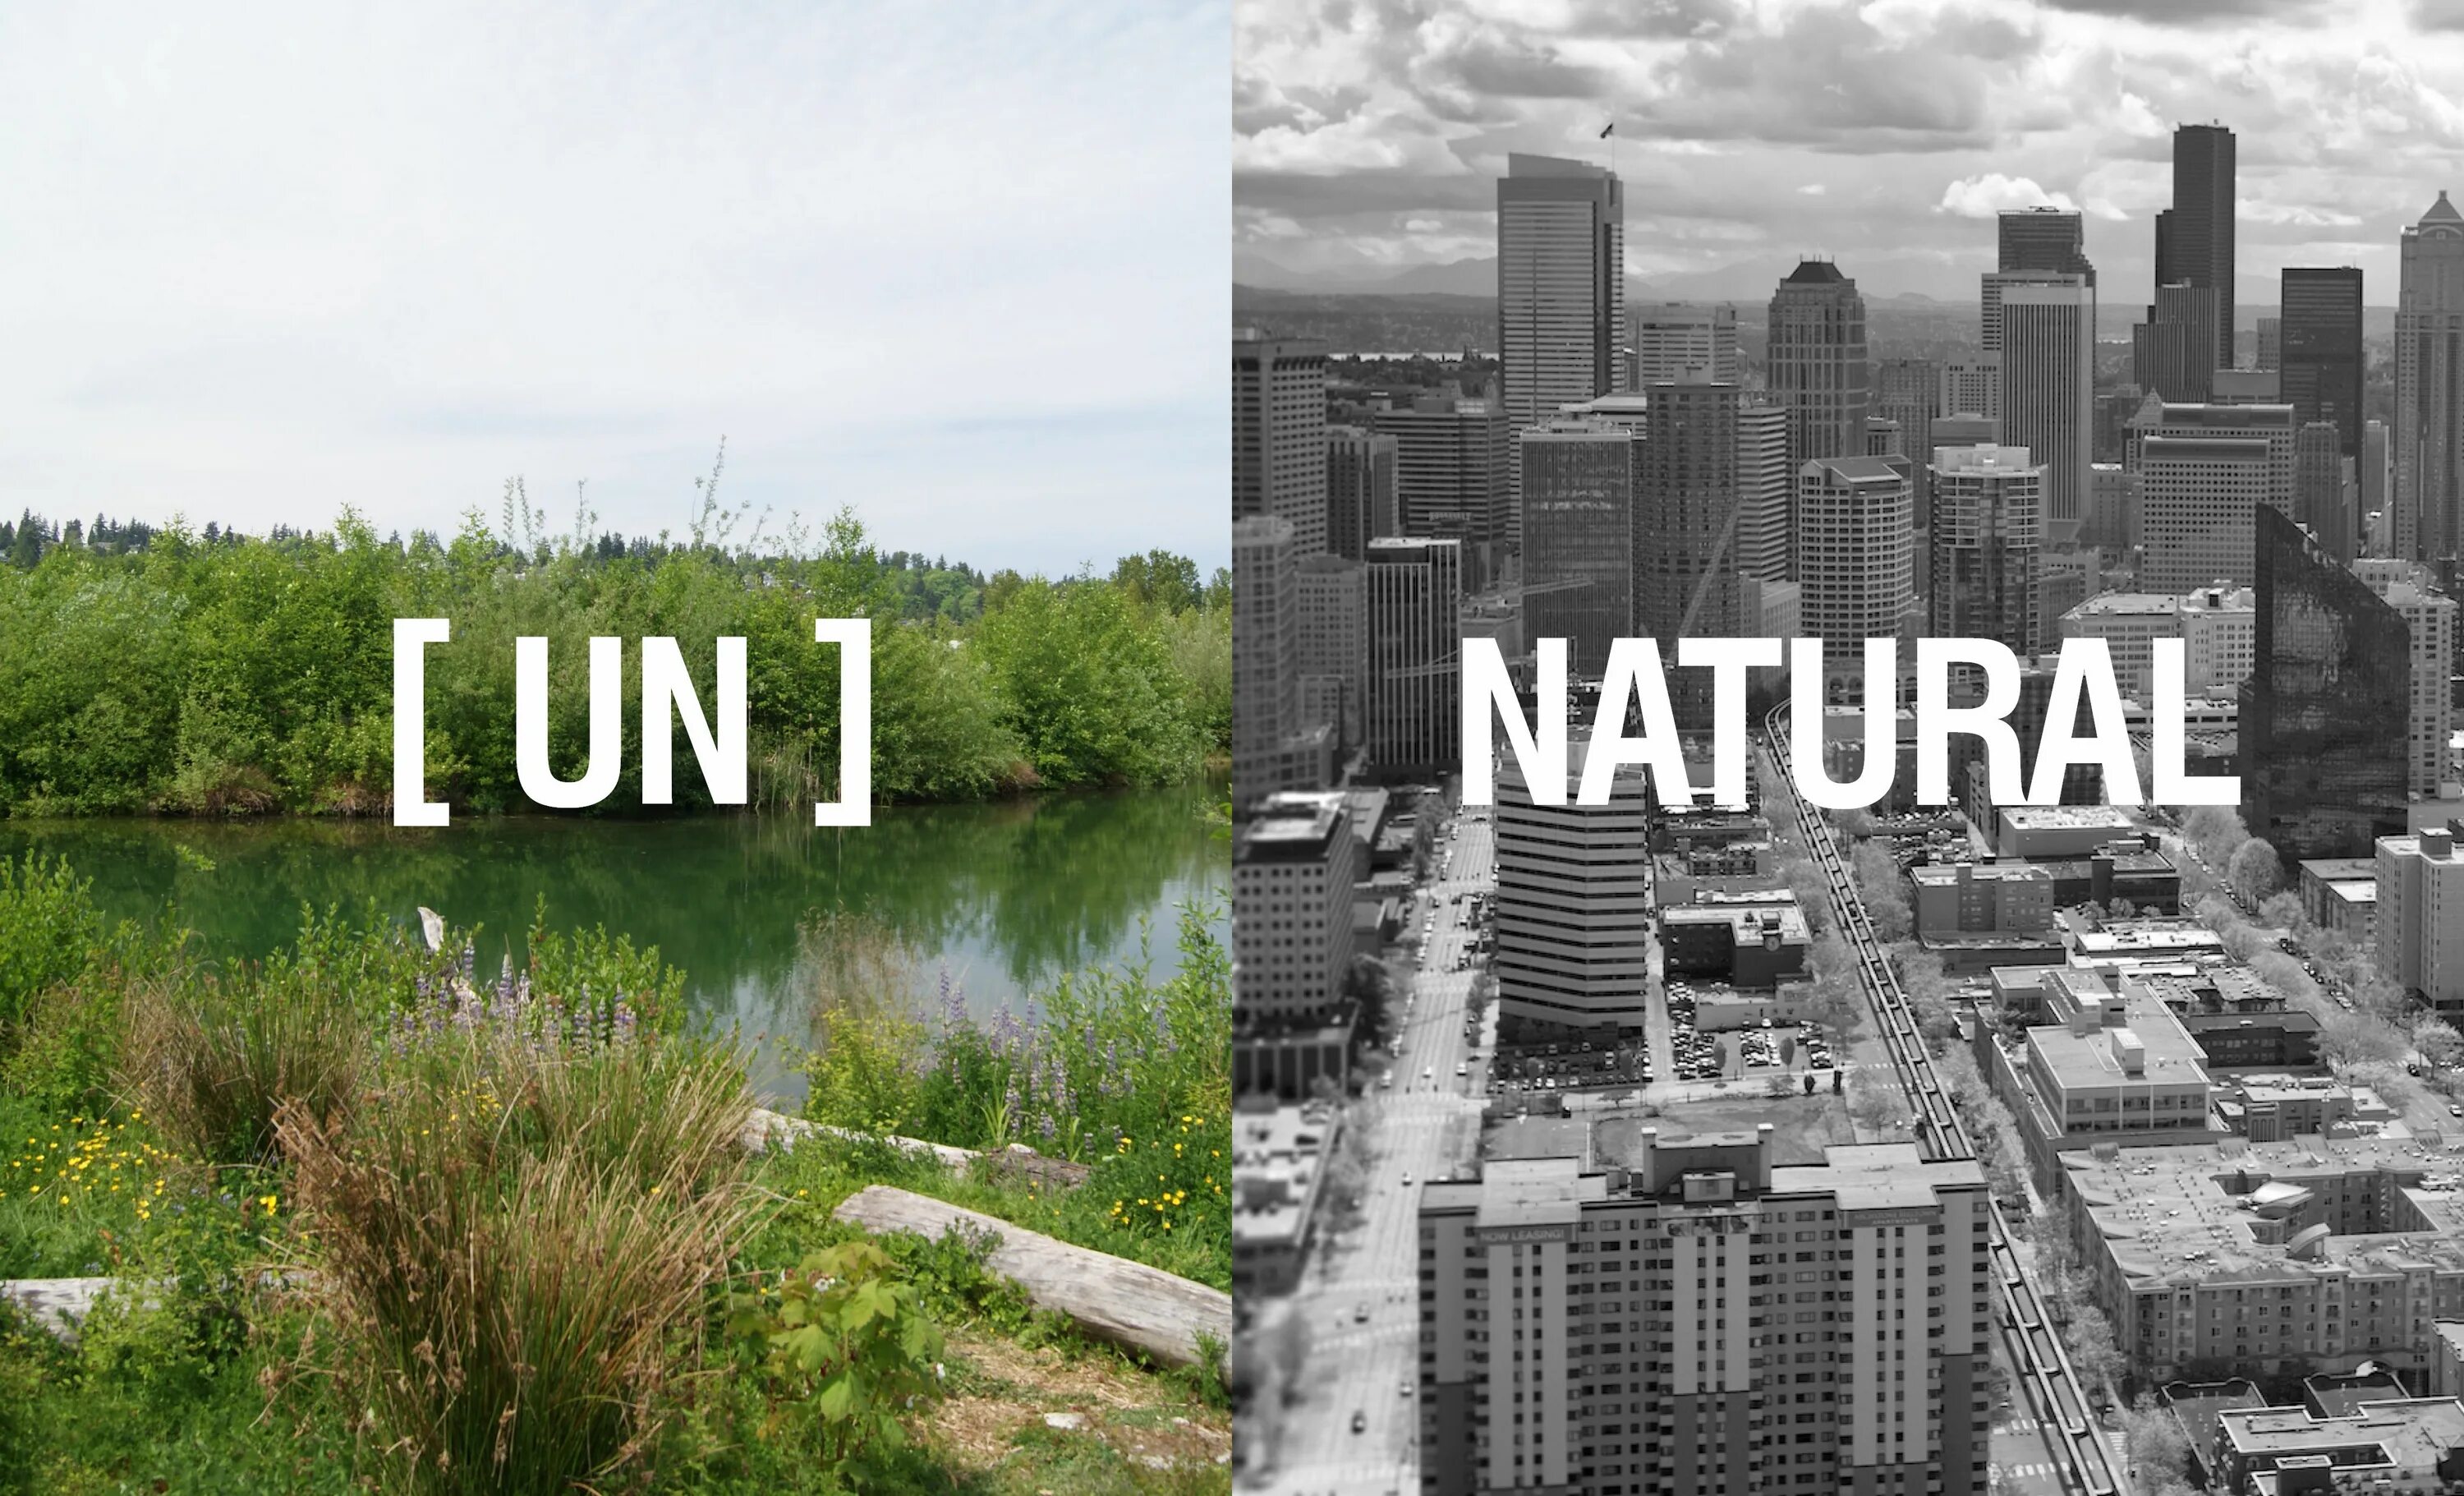 Nature Guide. Nature is a City. Urban Future Day. Un natural